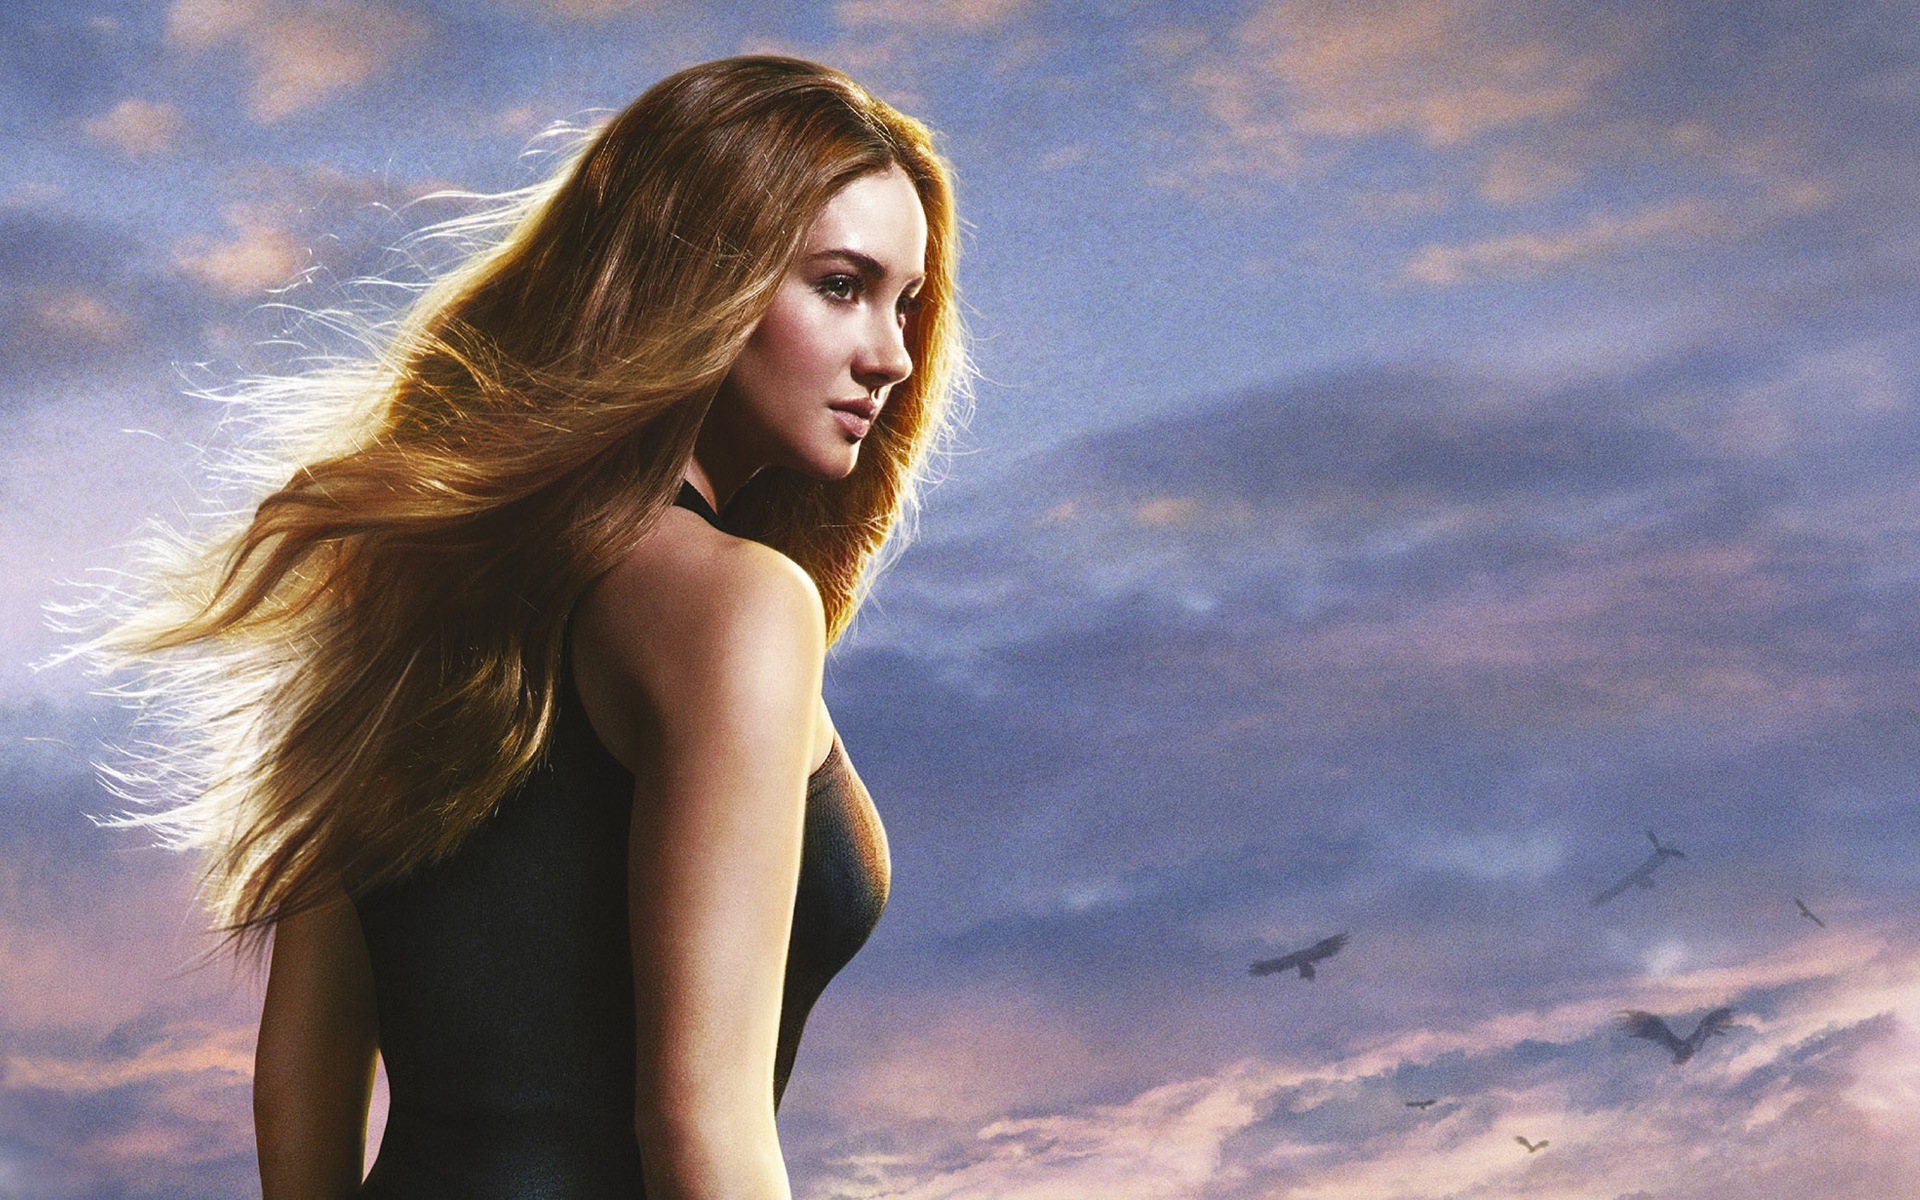 Divergent movie HD wallpapers #11 - 1920x1200